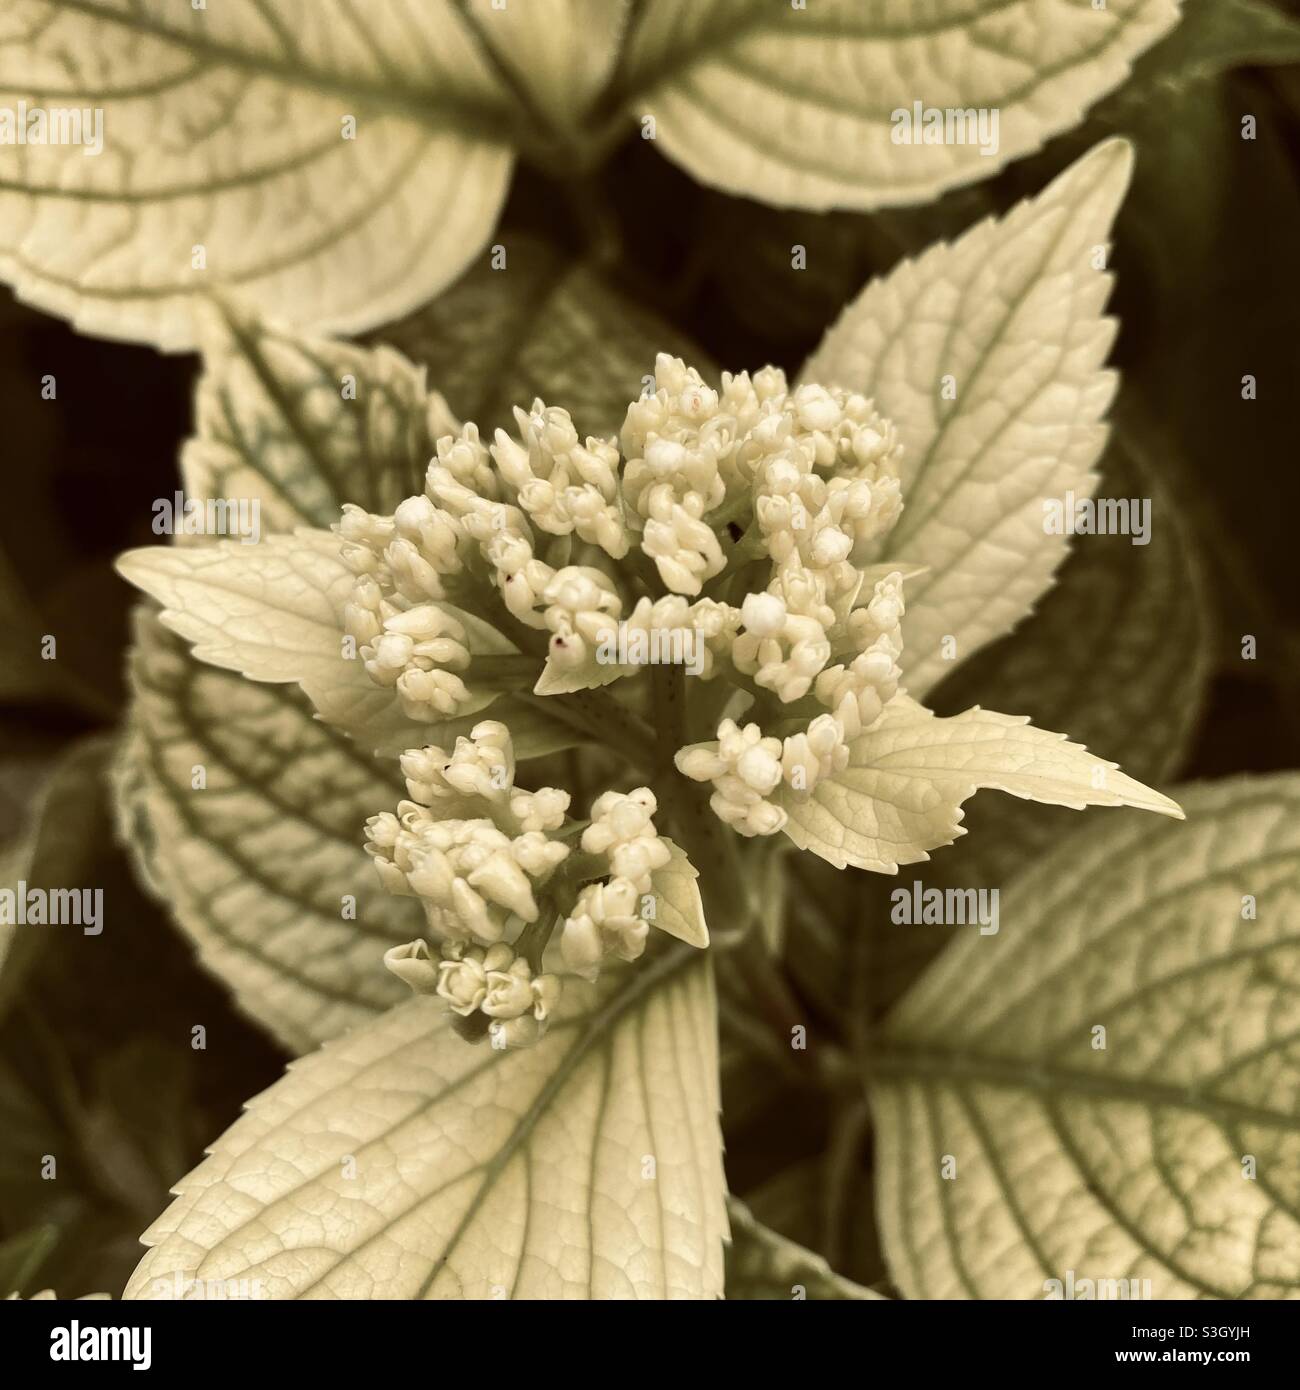 Art photography of leaves Stock Photo